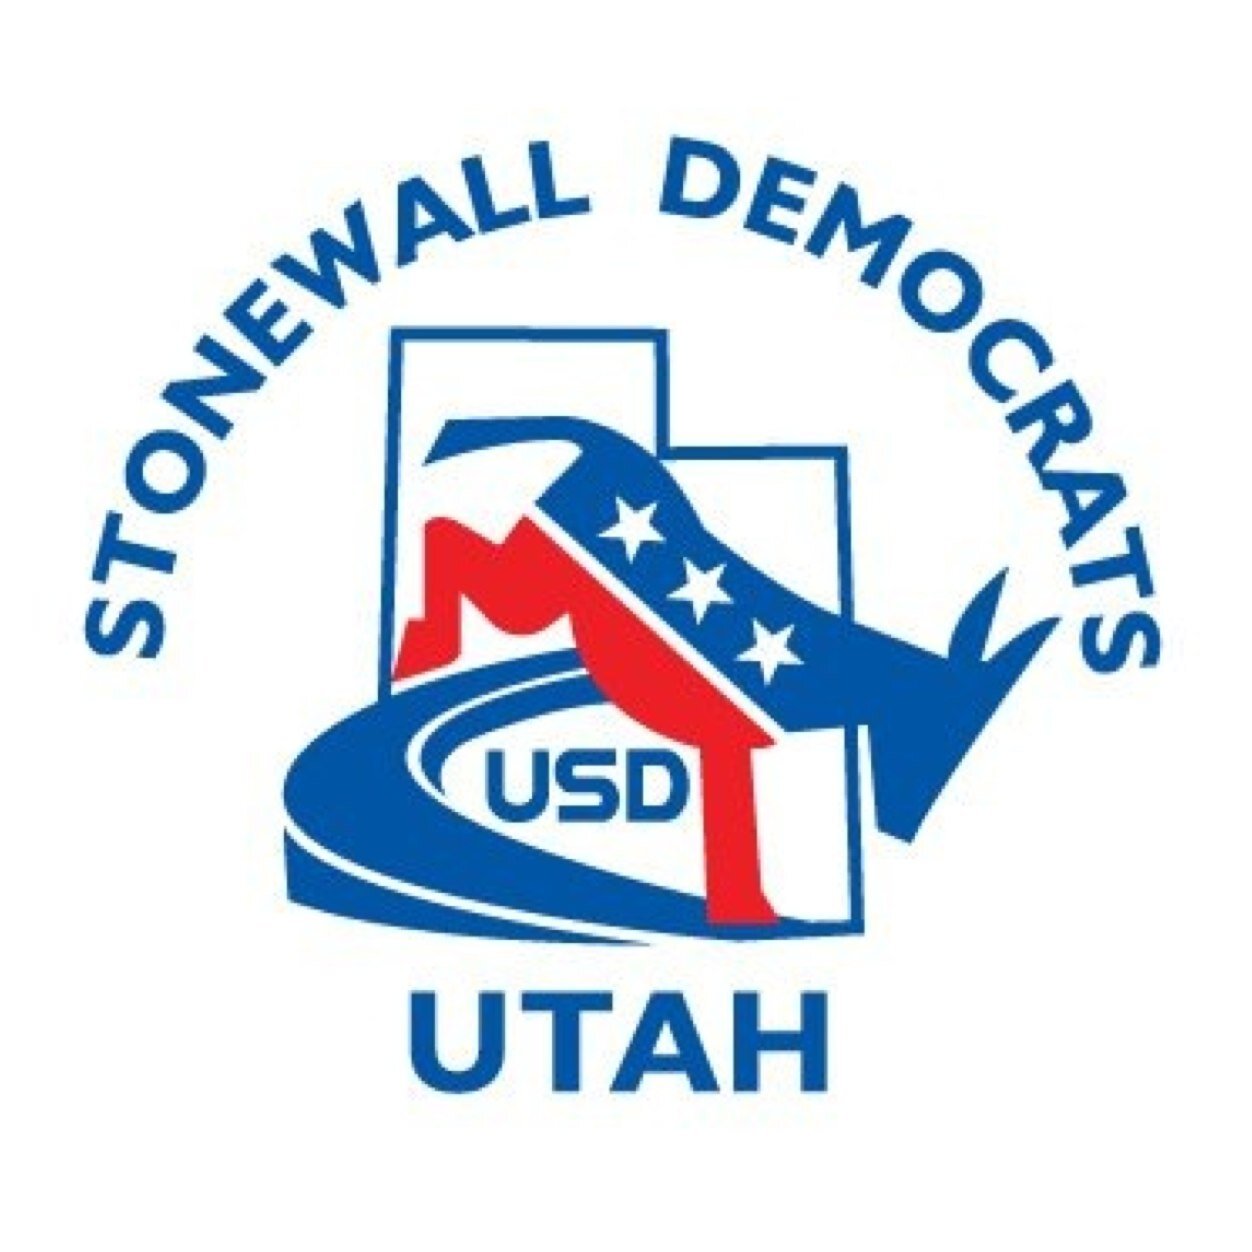 The Utah Stonewall Democrats work for equal rights for Utah’s lesbian, gay, bisexual, and transgender communities and their families.